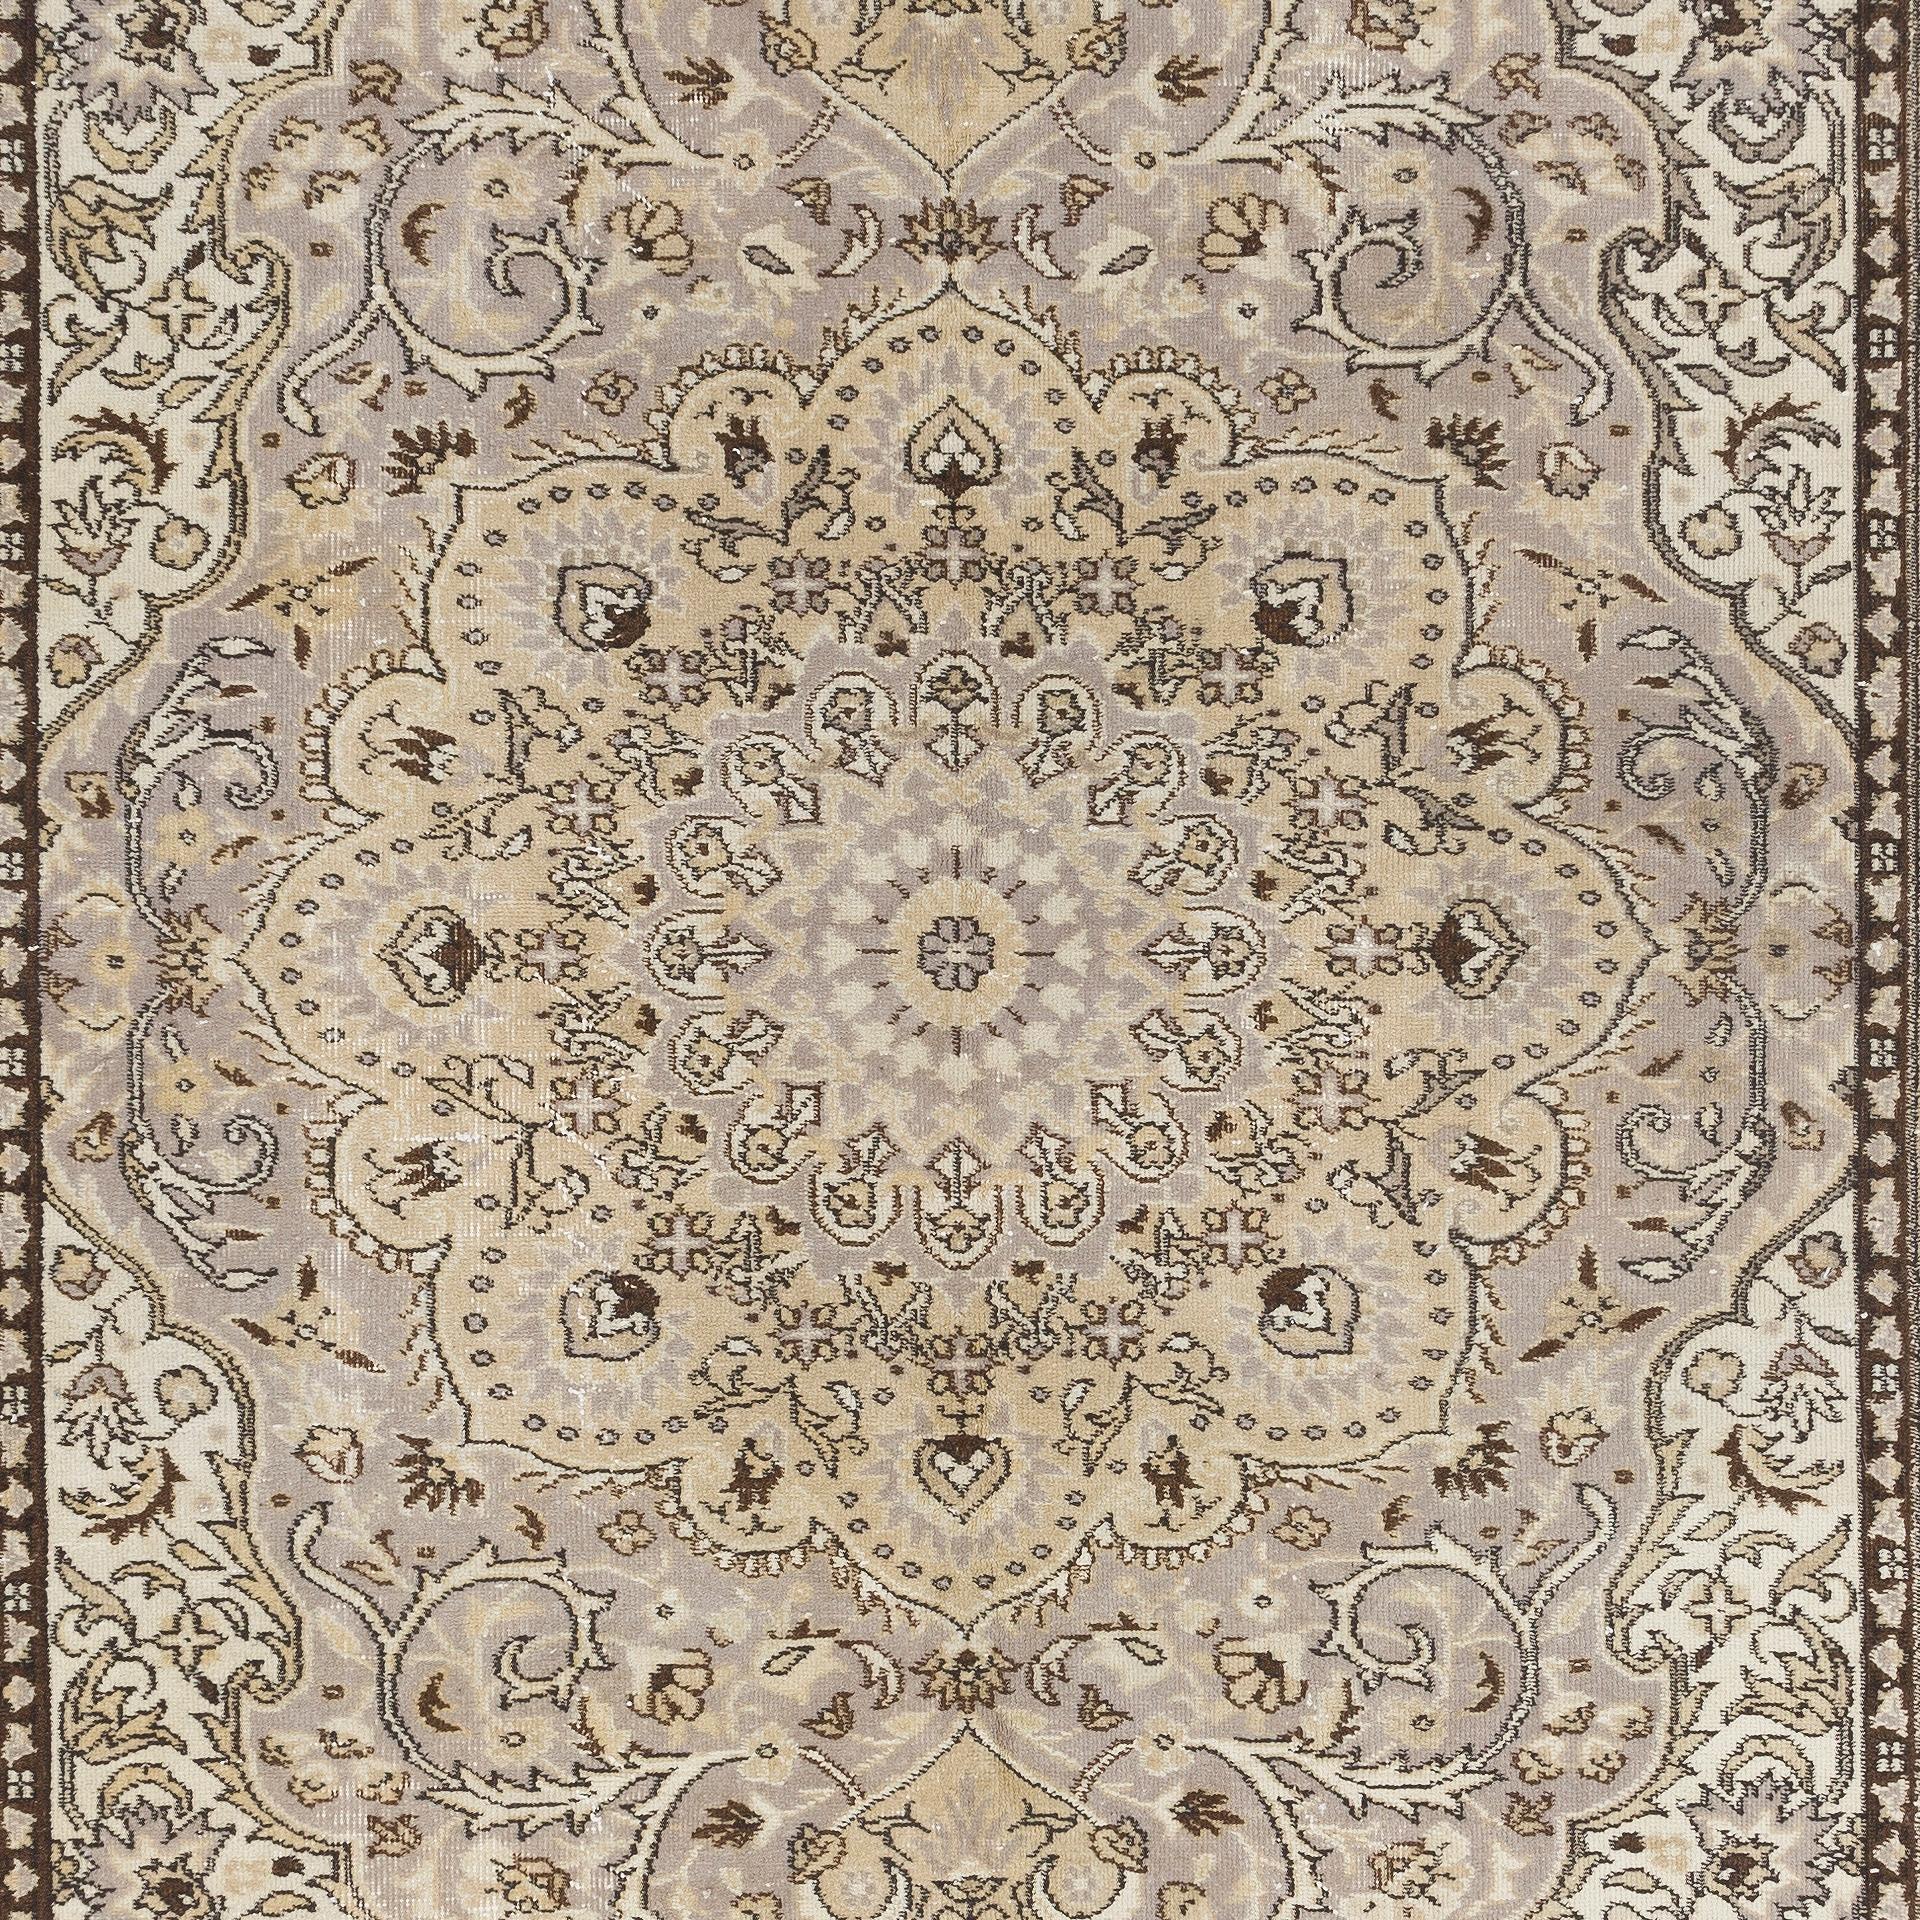 Oushak 6.8x10 Ft Handmade Anatolian Area Rug in Neutral Colors, Vintage Carpet in Beige For Sale